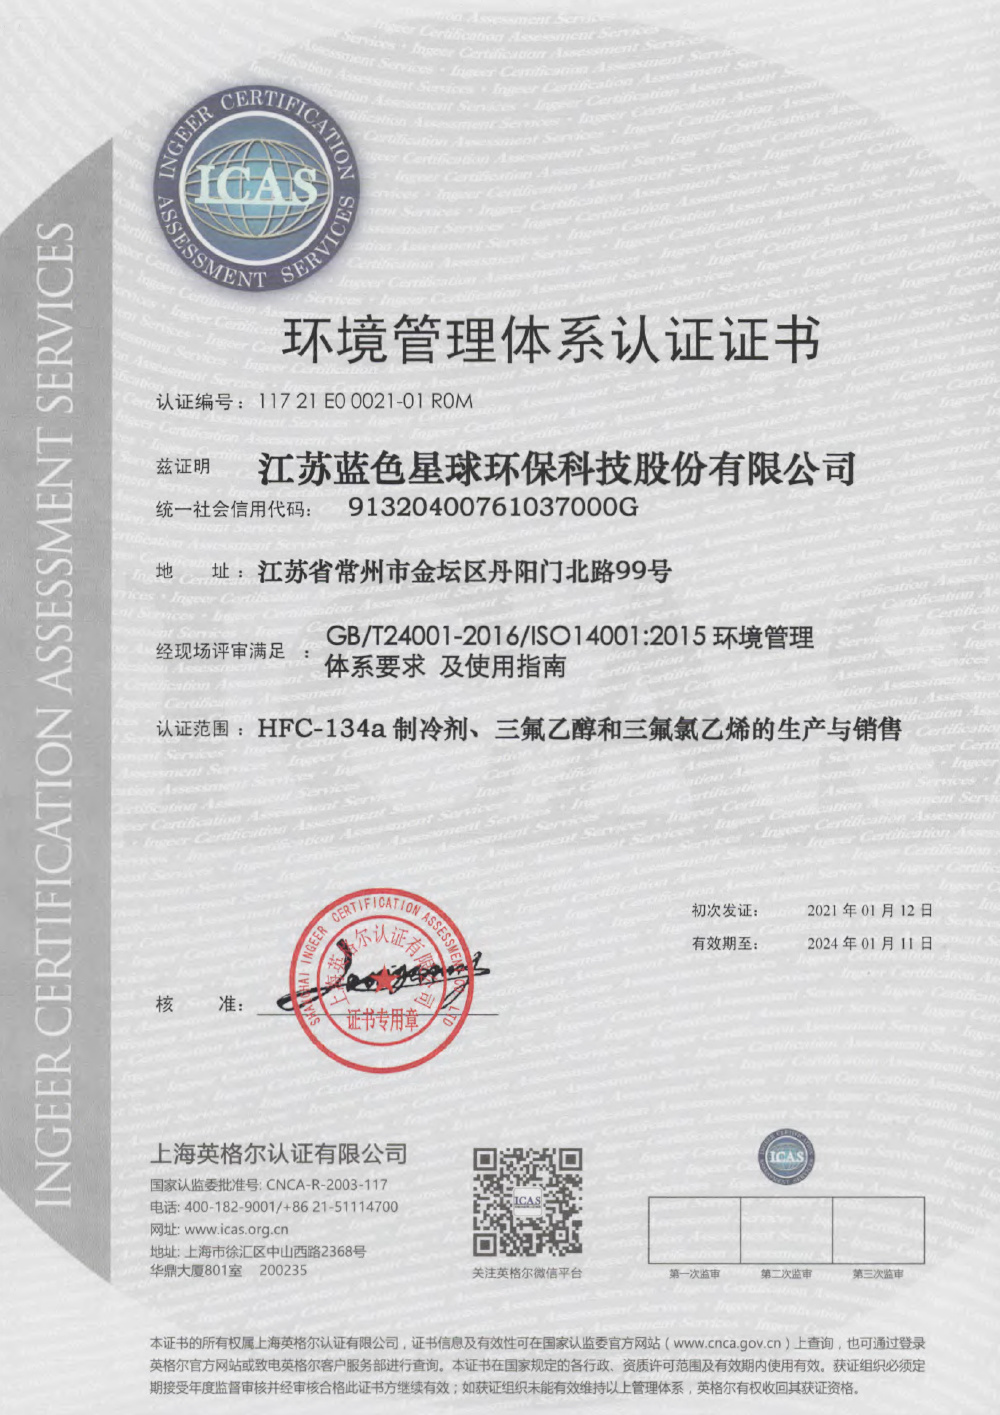 Environmental Management System Certificate (2021)